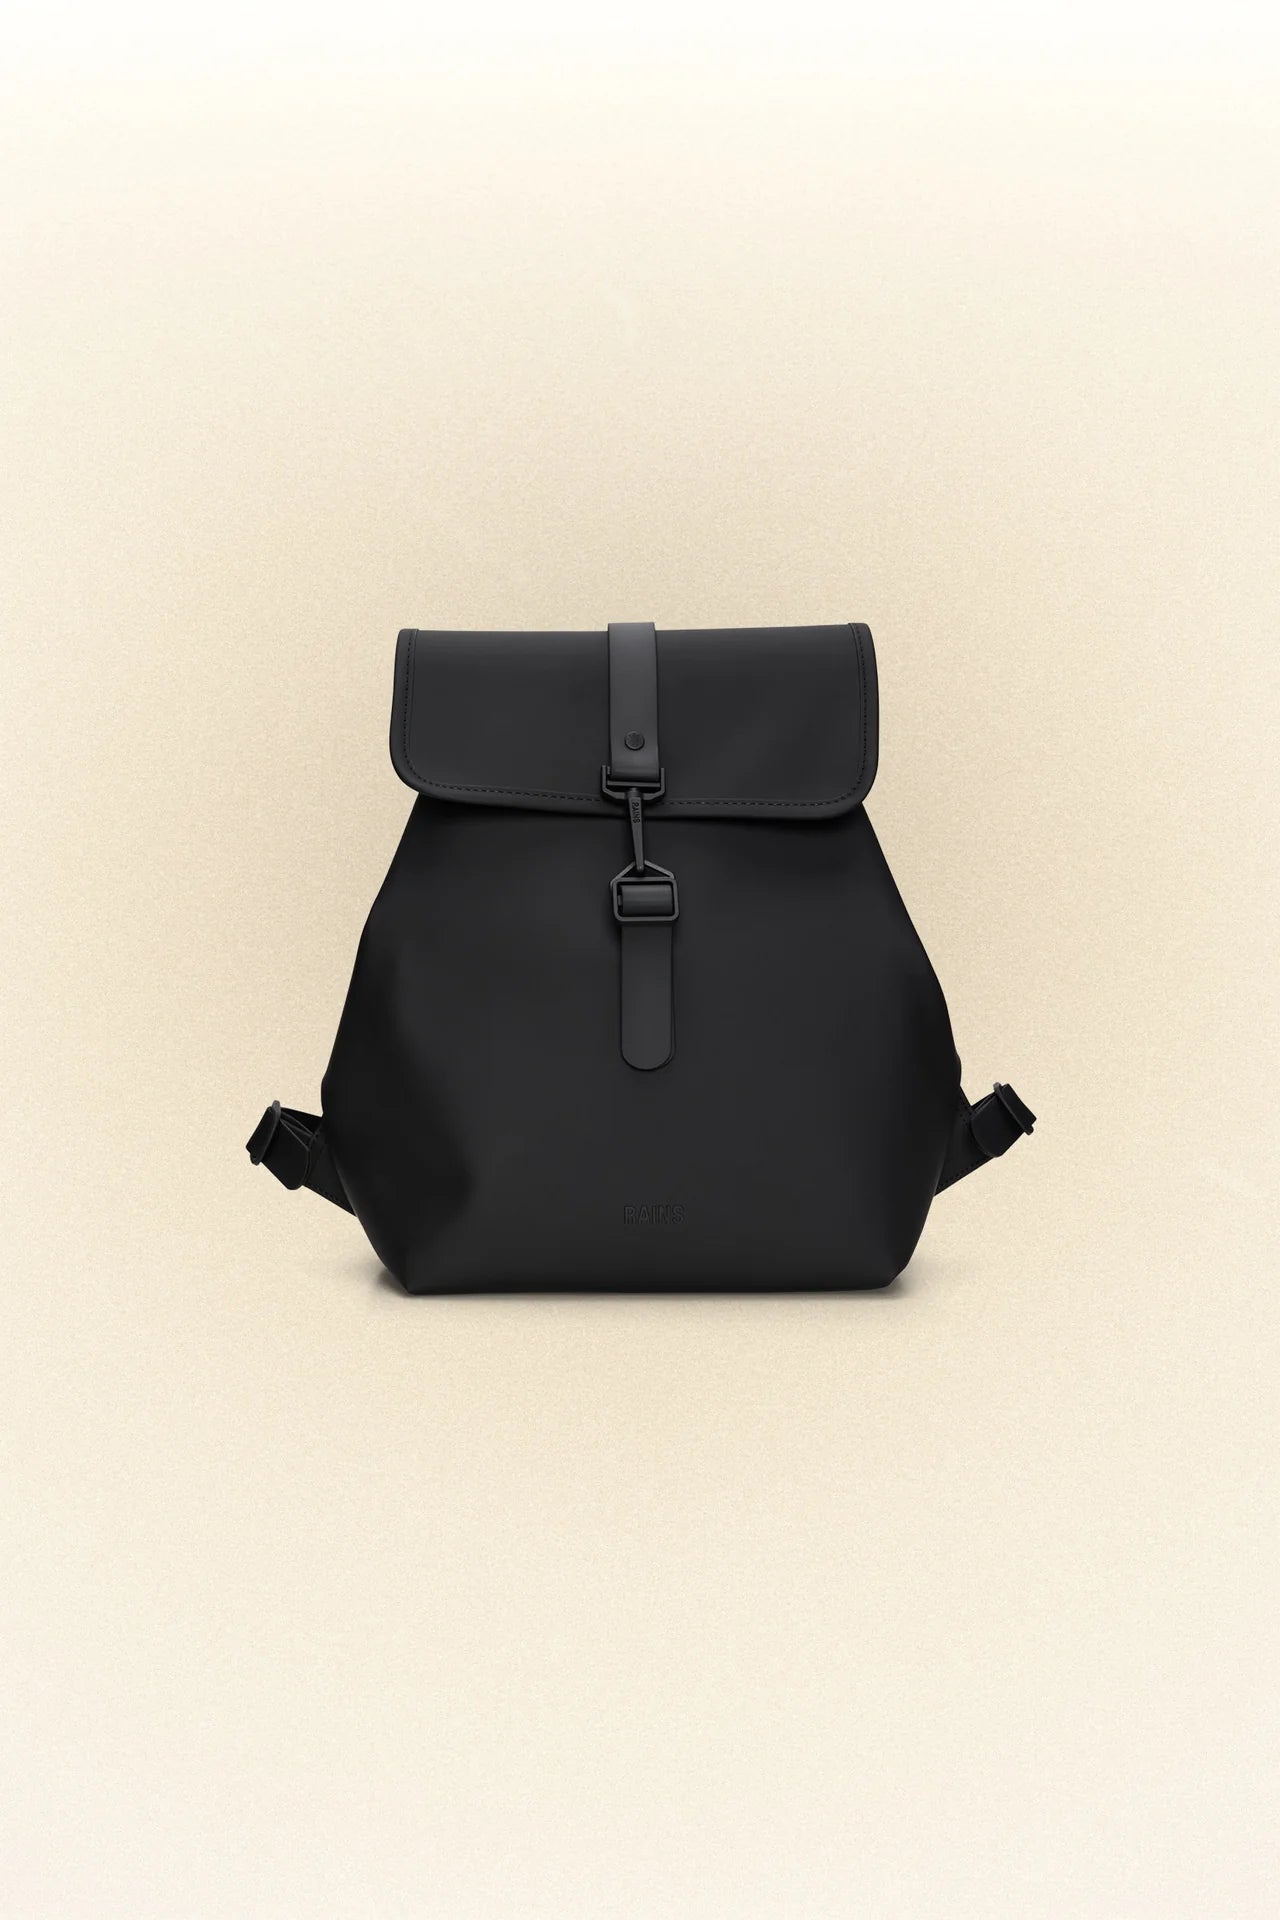 A waterproof Bucket Backpack - Black made of PU coated fabric on a beige background by Rains.